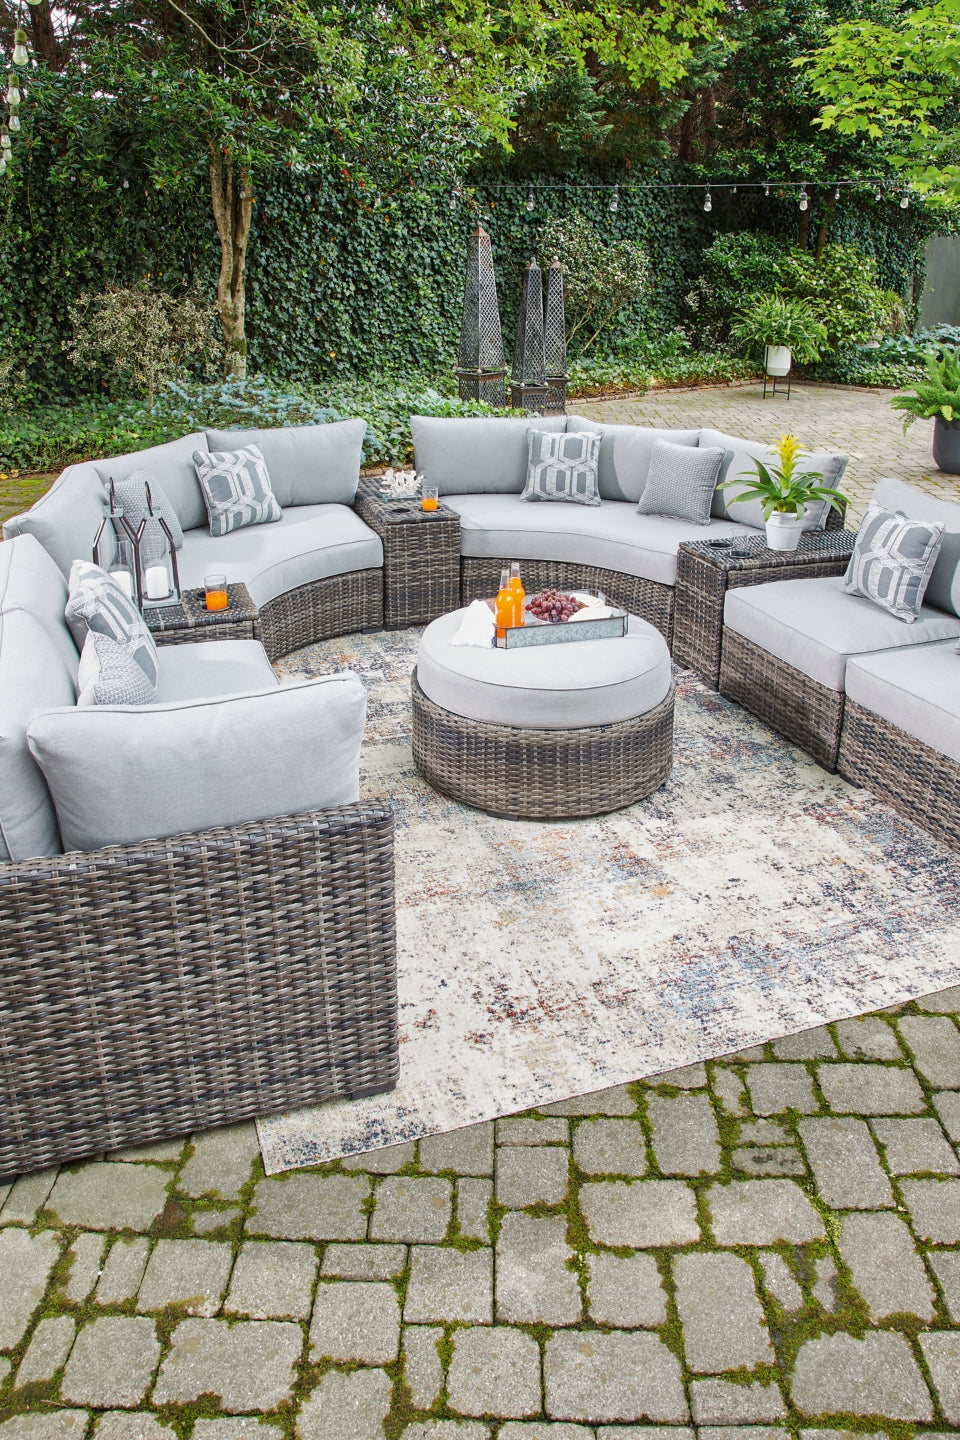 Harbor Court 9-Piece Outdoor Sectional with Ottoman